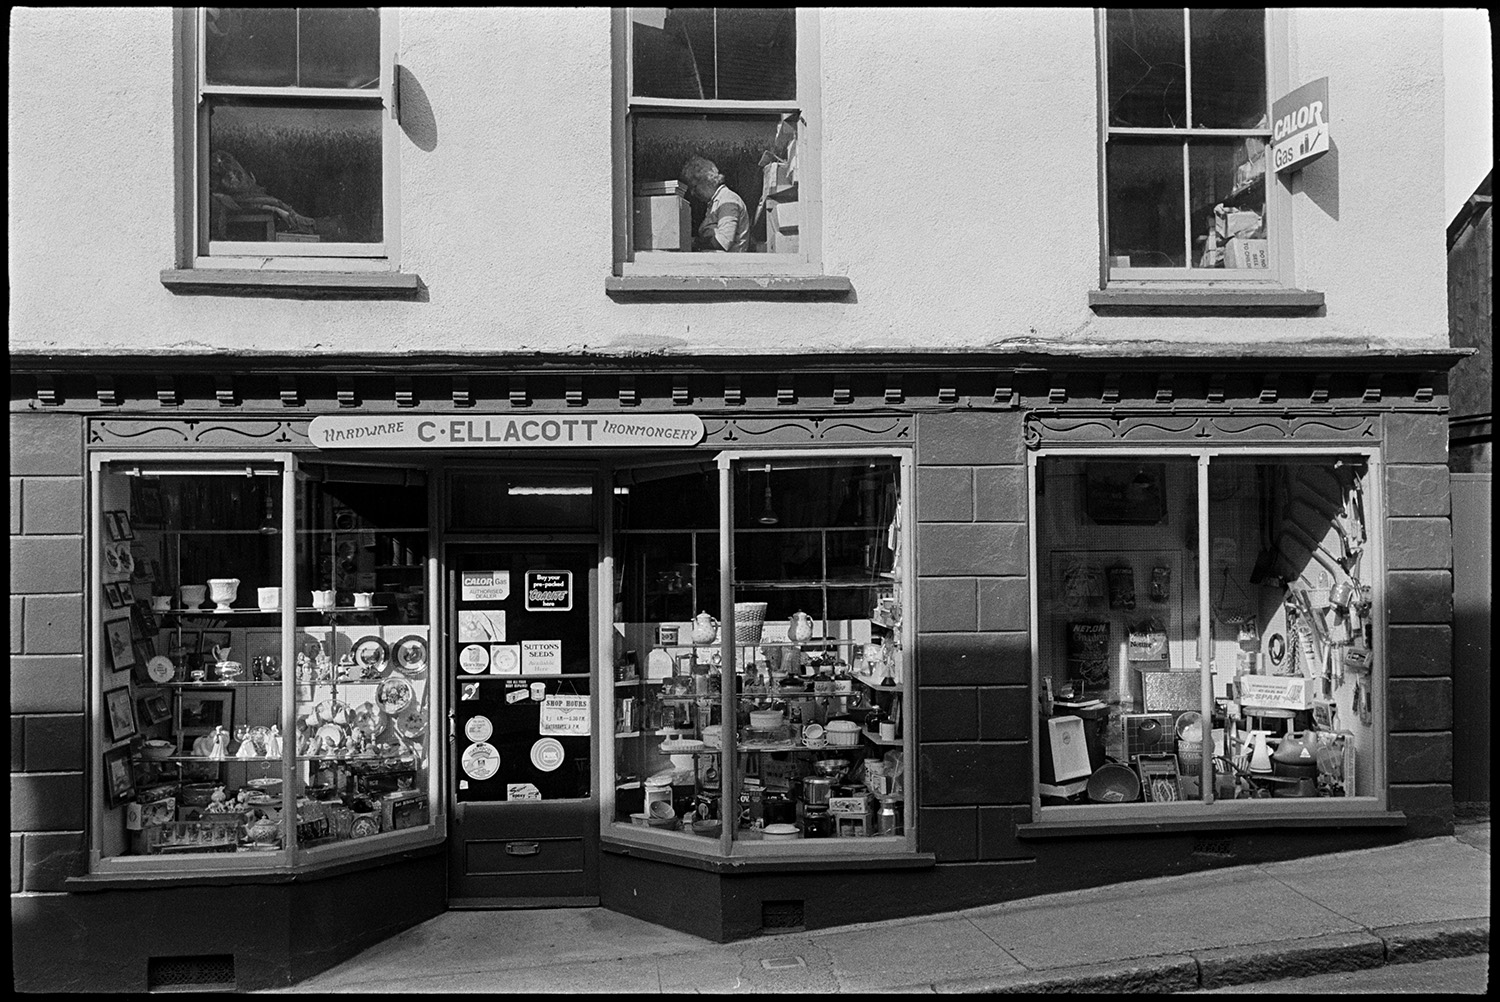 Front of ironmonger's shop. Exterior.
[Exterior of Ellacott's ironmongery shop in Market Street, Hatherleigh. China ornaments, pots and kitchen goods are on display in the shop front window. A woman is shown working in a upstairs window. There is a Calor gas sign, and a handwritten shop sign on the building.]